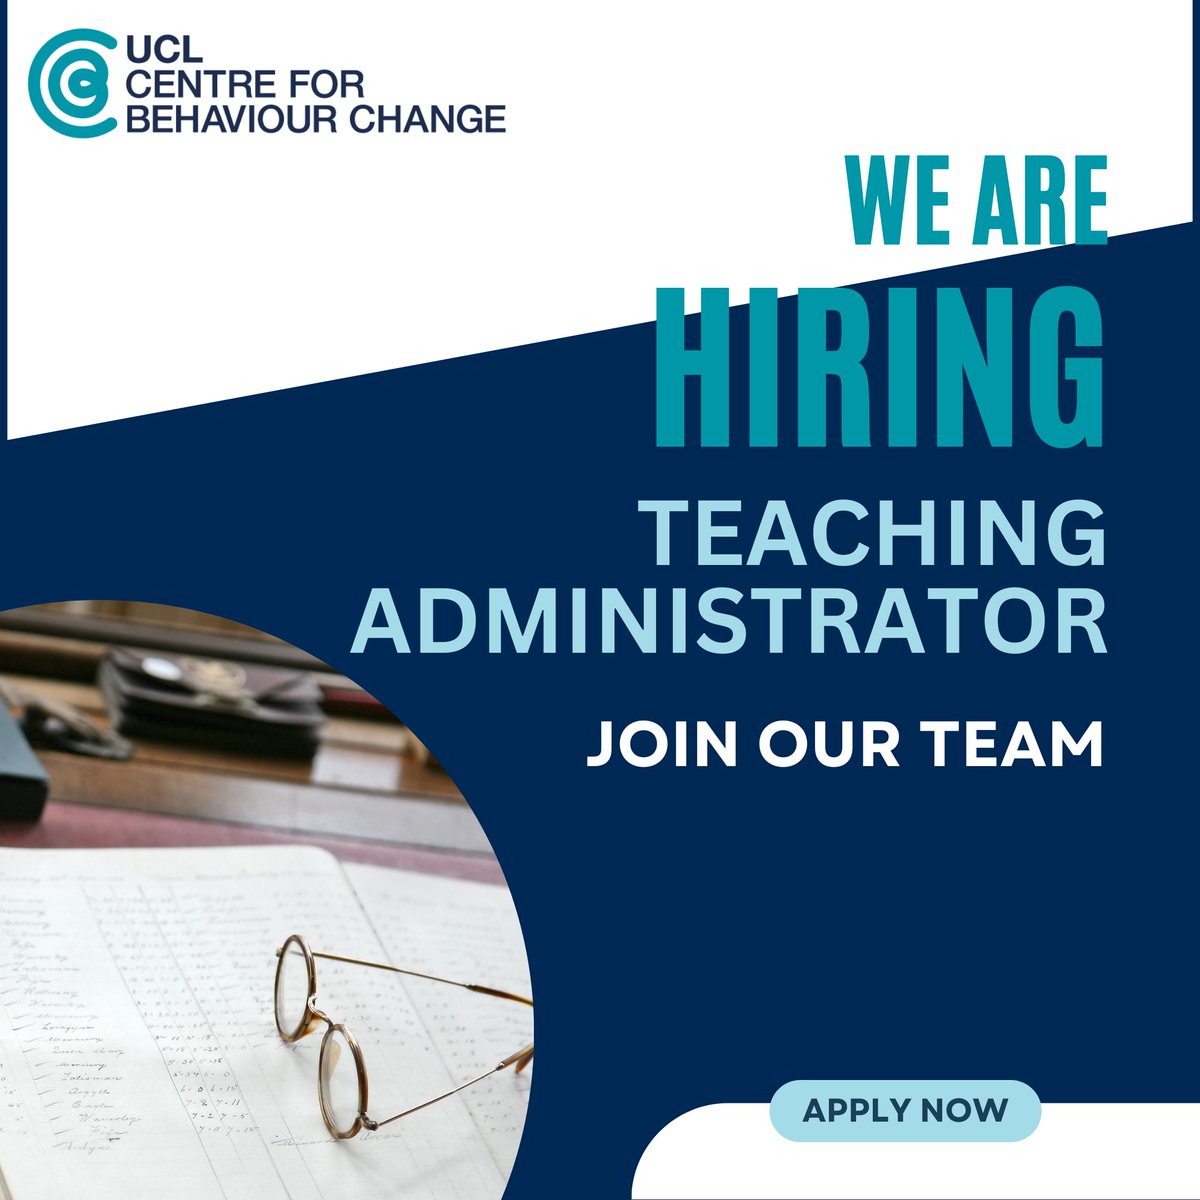 Are you a highly skilled and motivated individual? We are looking for you to join the UCL Centre for Behaviour Change (CBC) as a Teaching Administrator! #hiringalert #behaviour #change Closing Date for Applications: 24 Oct 2022 Apply here:⬇️ tinyurl.com/5dzcxd8v